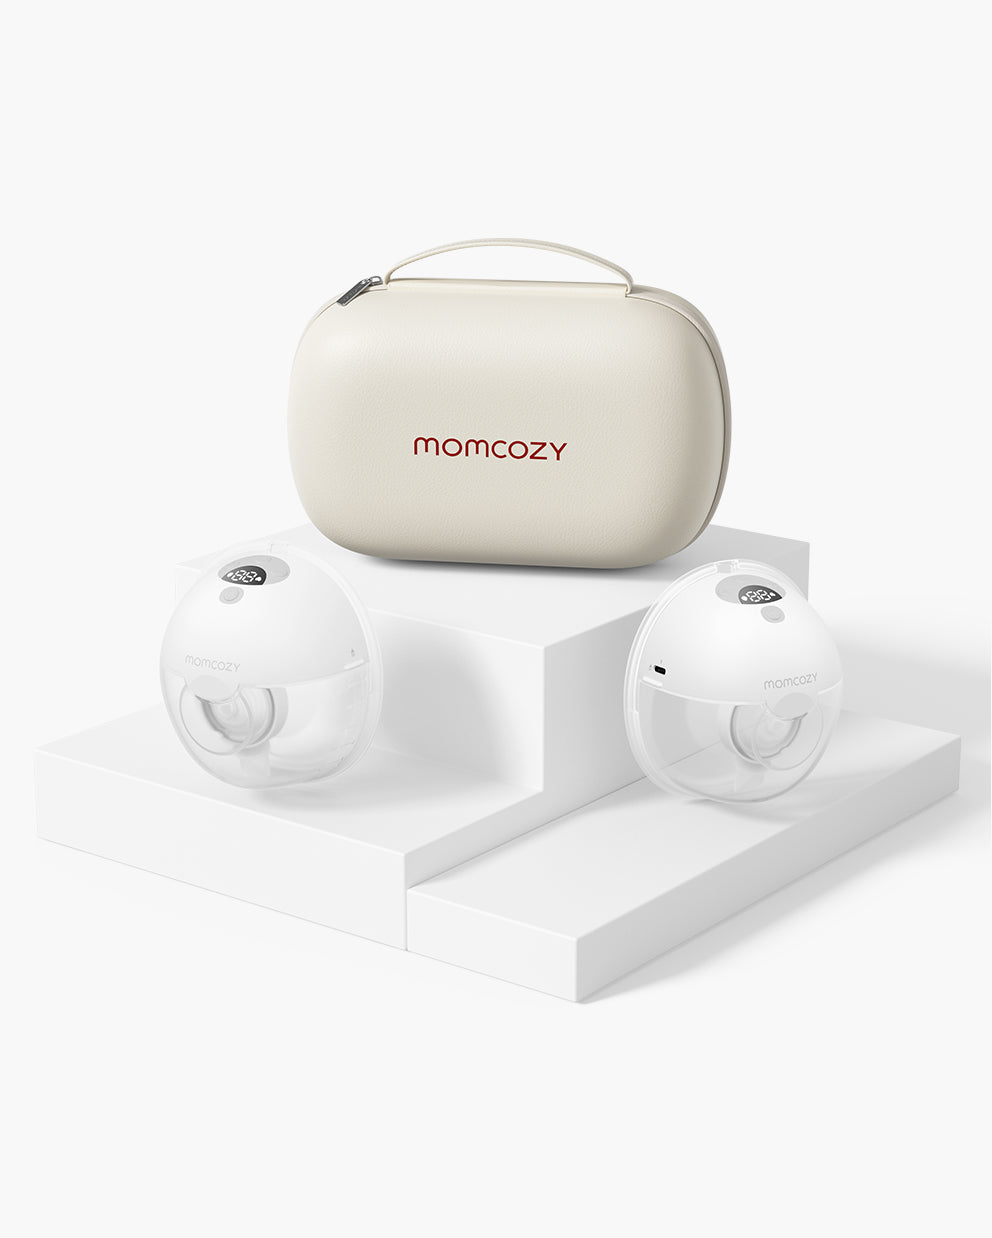 Momcozy Muse 5 Wirelss Breast Pump Hands free, Wearable Breast